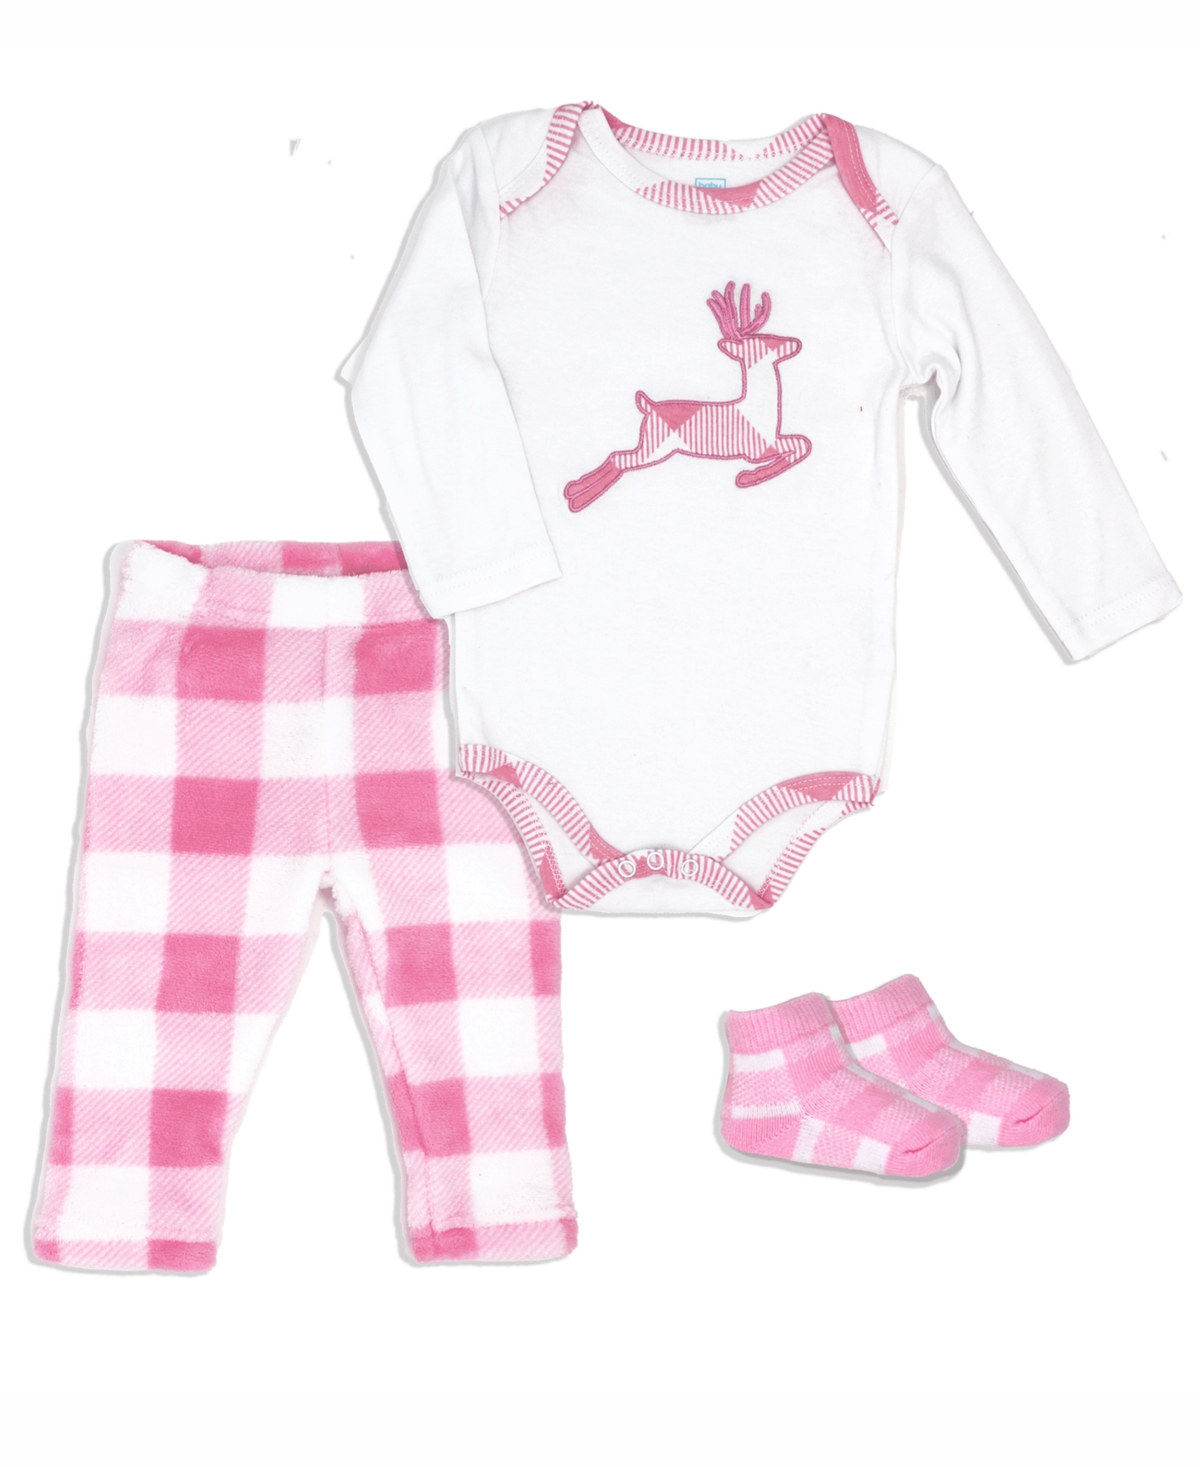 Baby Mode Baby Boys Or Baby Girls Buffalo Plaid Bodysuit, Pants And Socks, 3 Piece Set In Pink And White